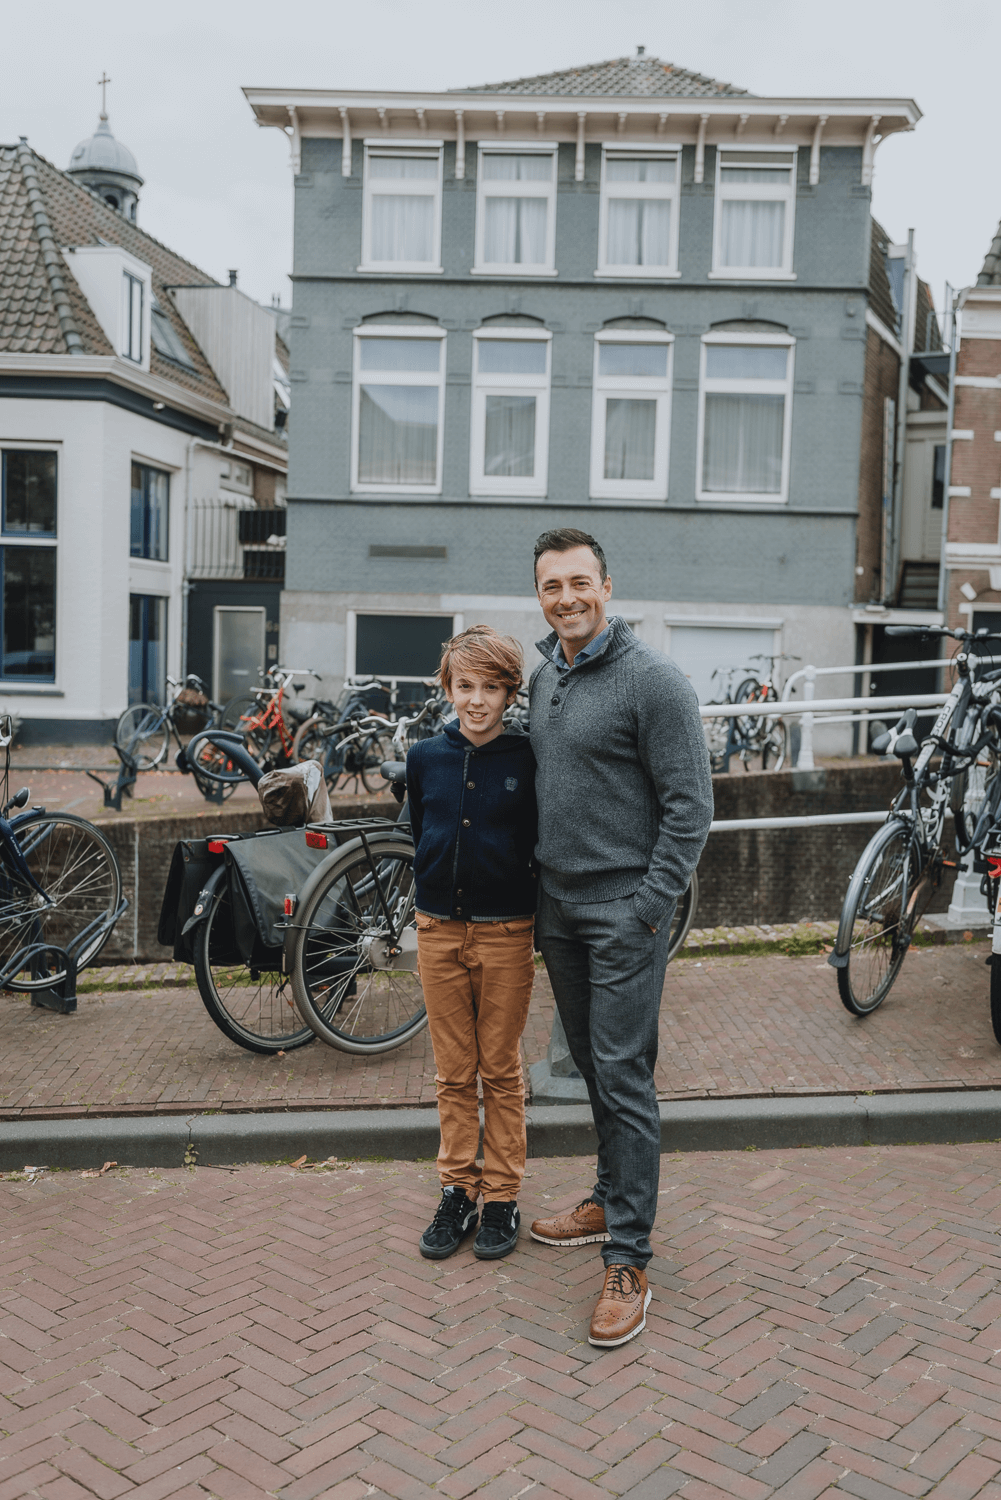 Gift Card Photoshoot in Haarlem-Amsterdam by Vicky McLachlan Photography | Bolster Family_8